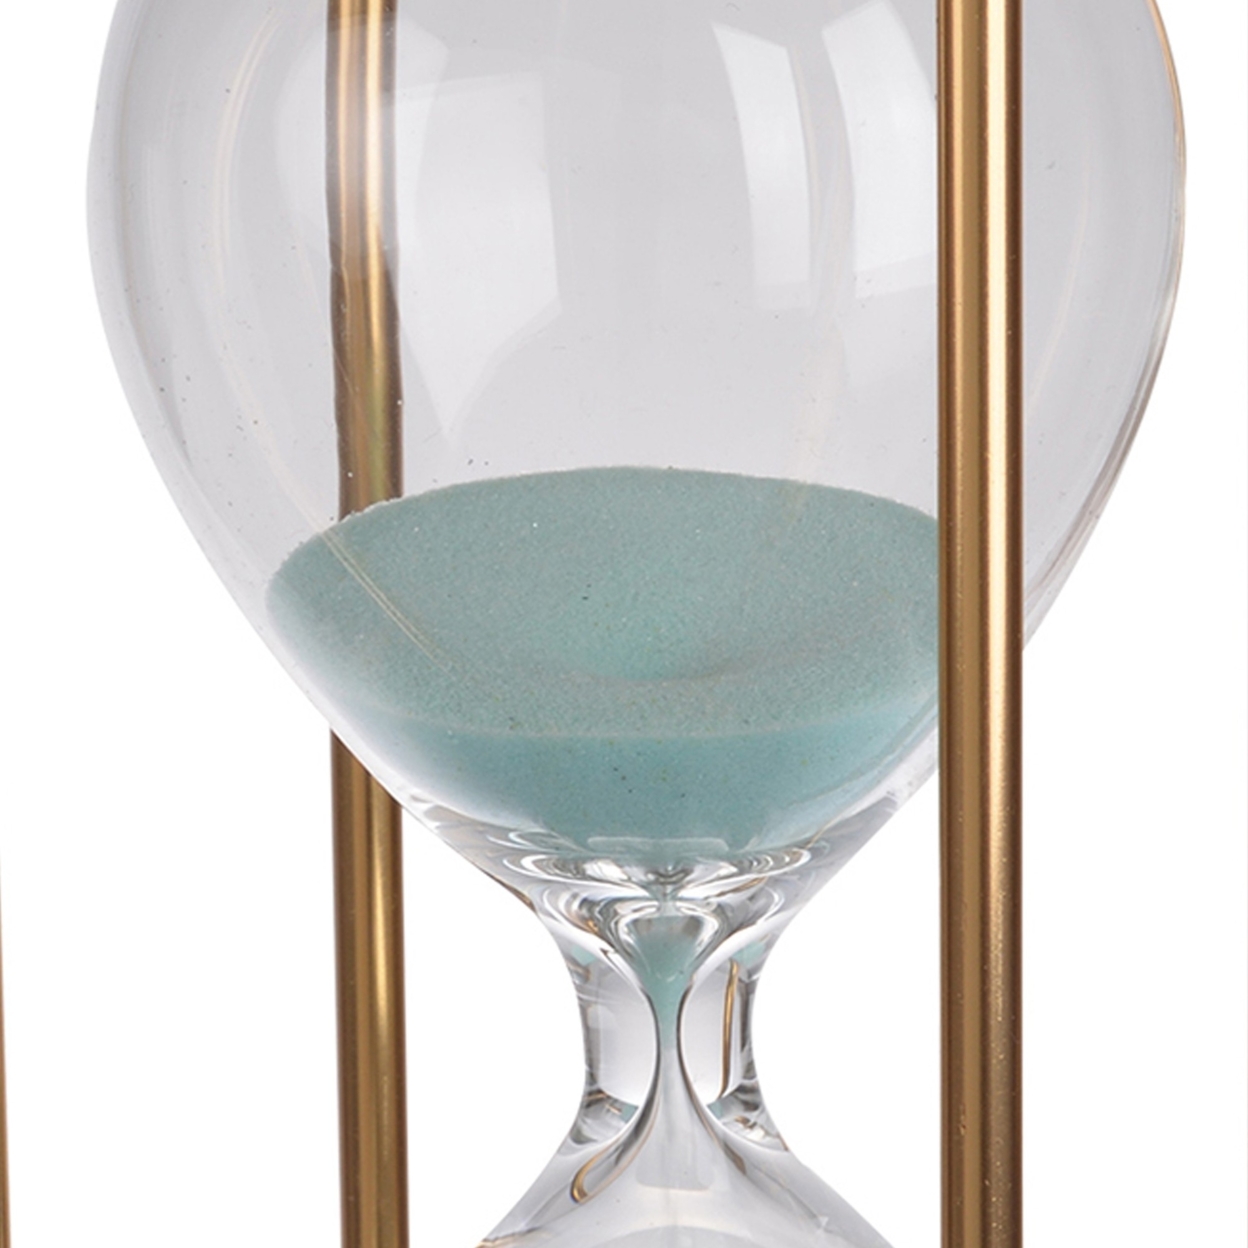 Doug Inch 30 Minute Sand Hourglass With Modern Stand Included, Gold, Blue- Saltoro Sherpi